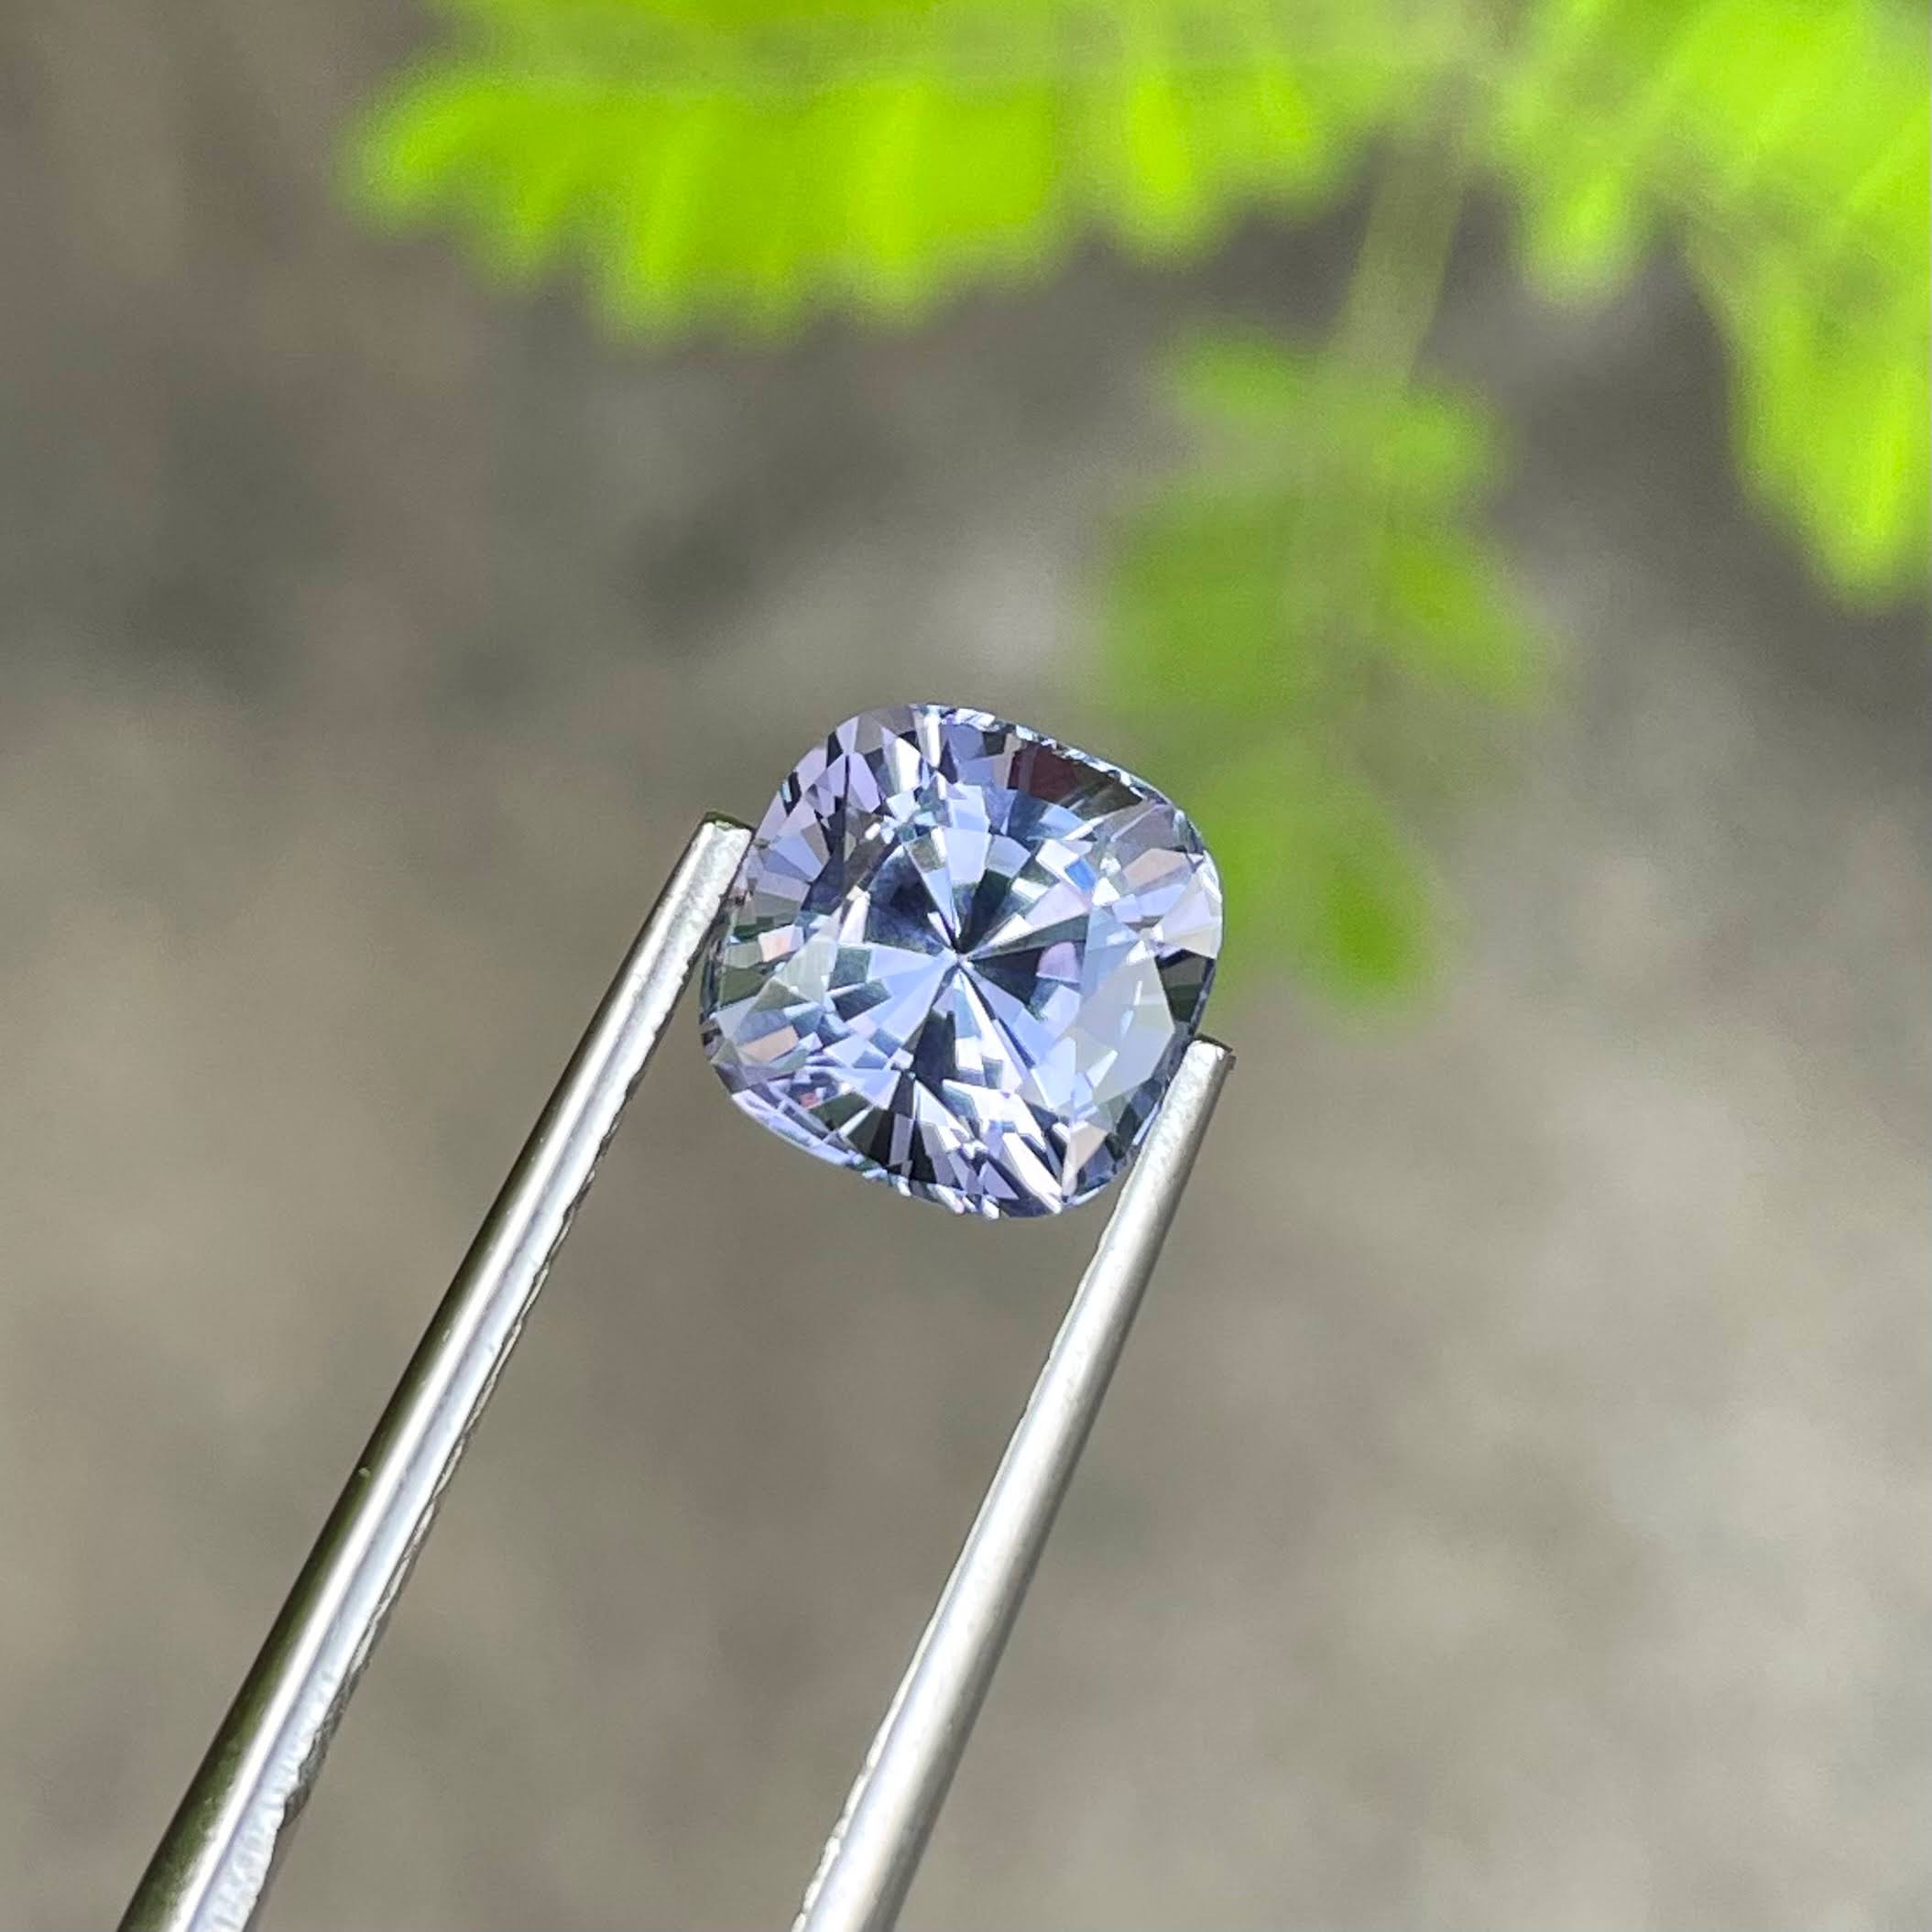 2.67 Carats Lavender Spinel Stone